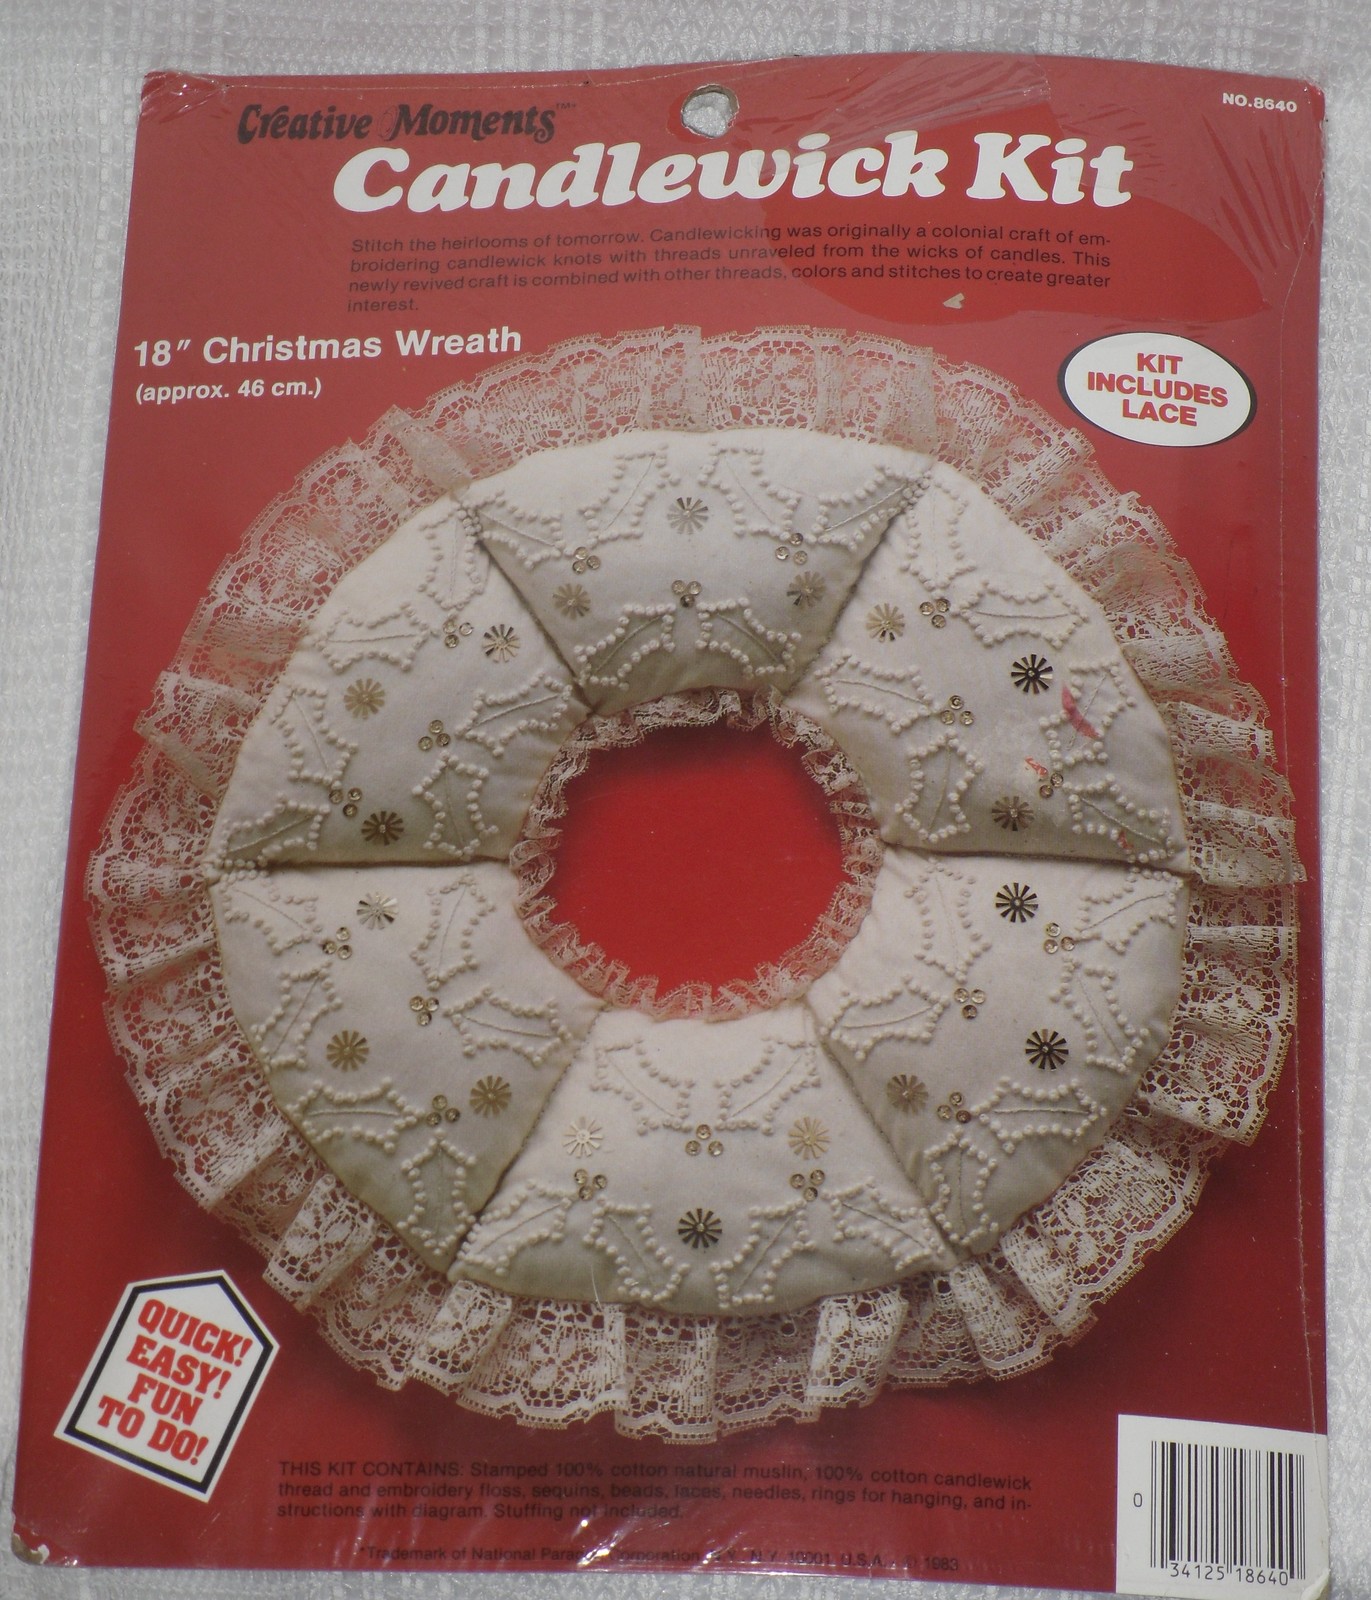 Creative Moments Candlewick Kit 18" Christmas Wreath Paragon 8640 Sealed Vintage - $9.95